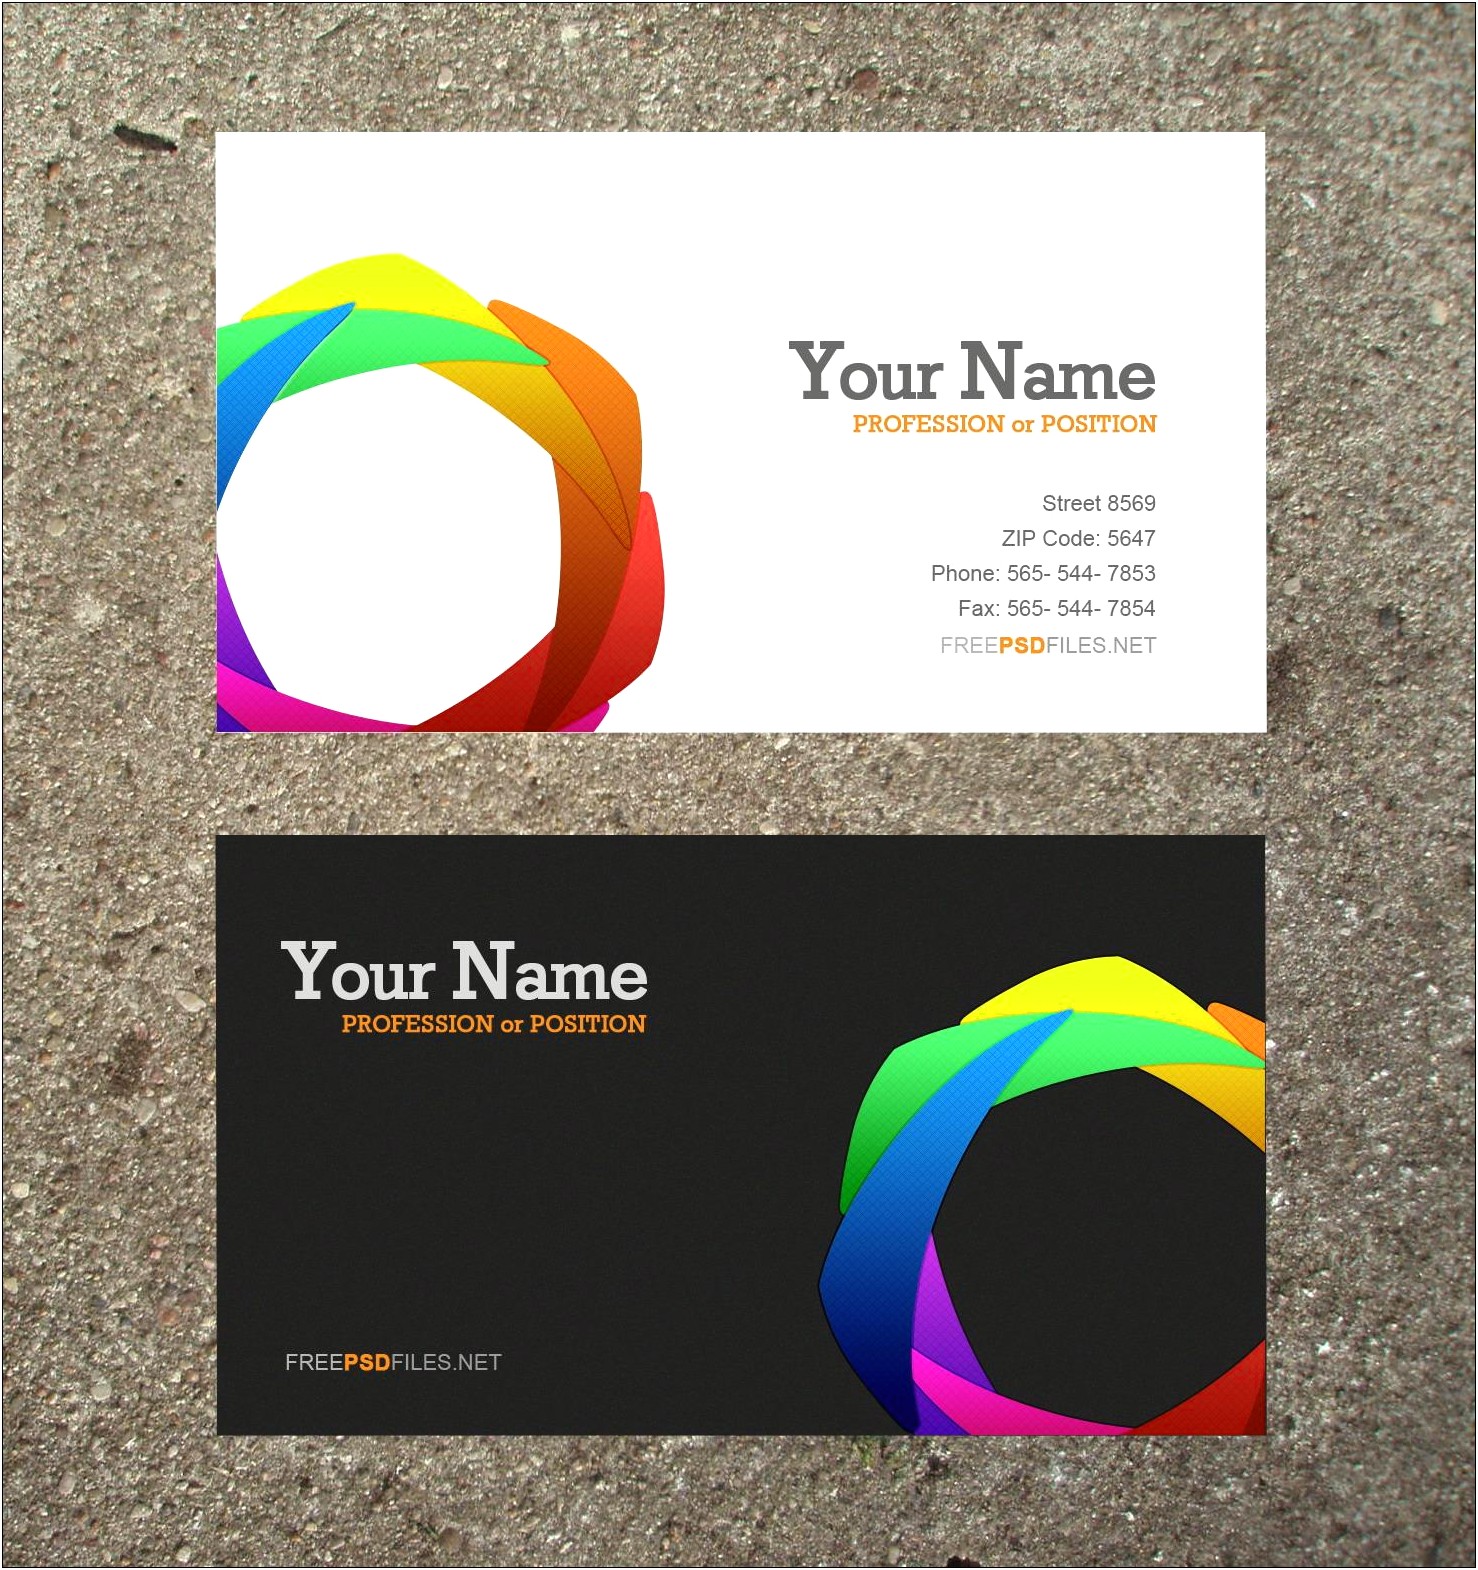 Download Free Business Card Templates Word